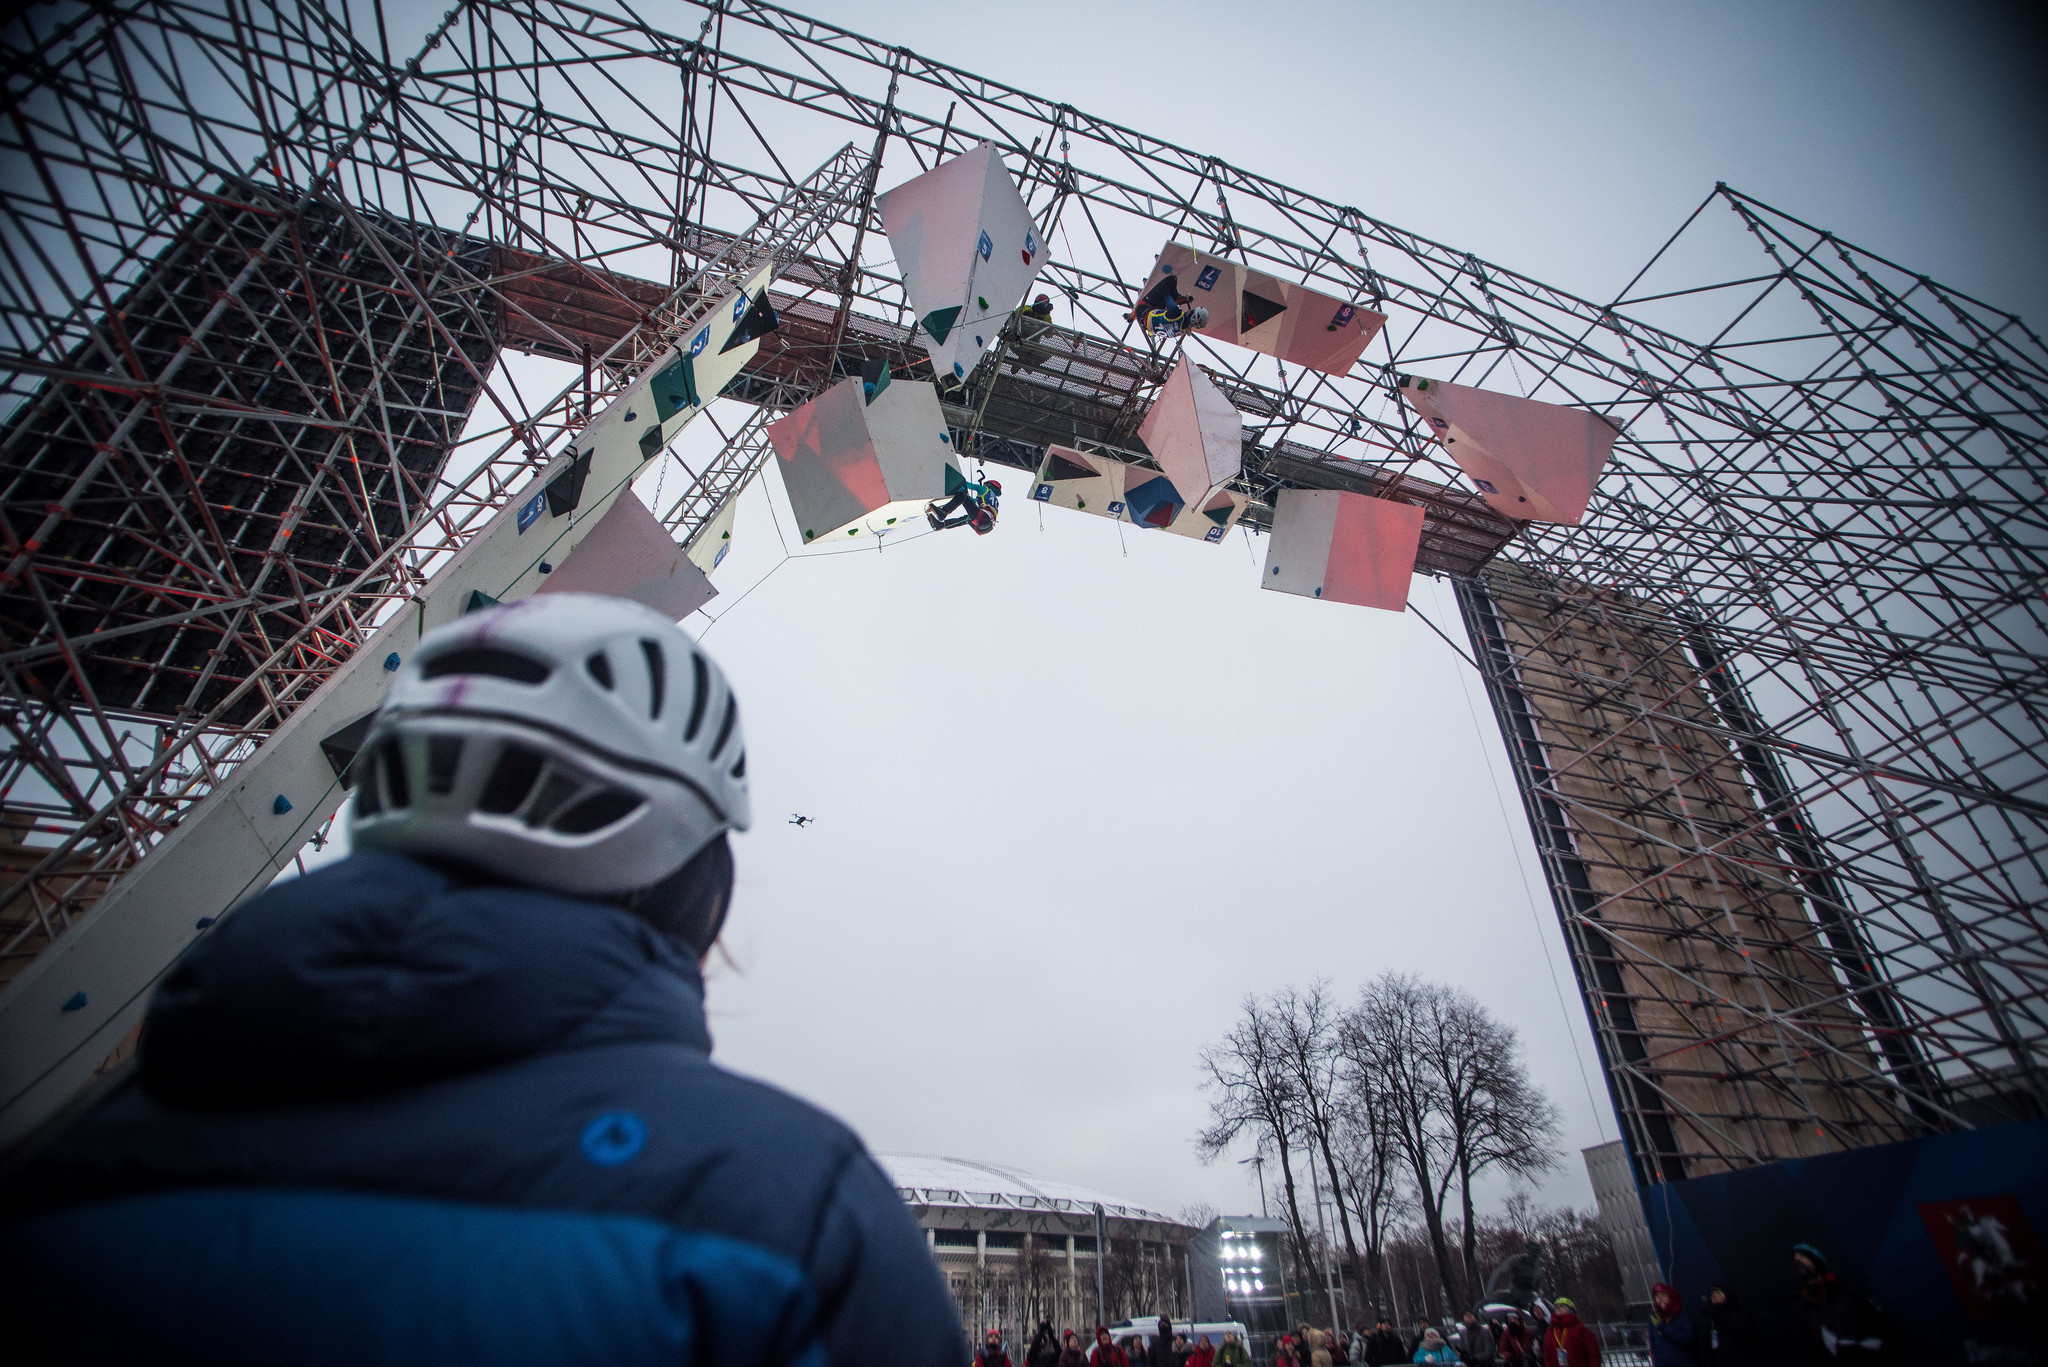 Russia celebrated double gold at the Ice Climbing World Combined Championships in Moscow ©UIAA